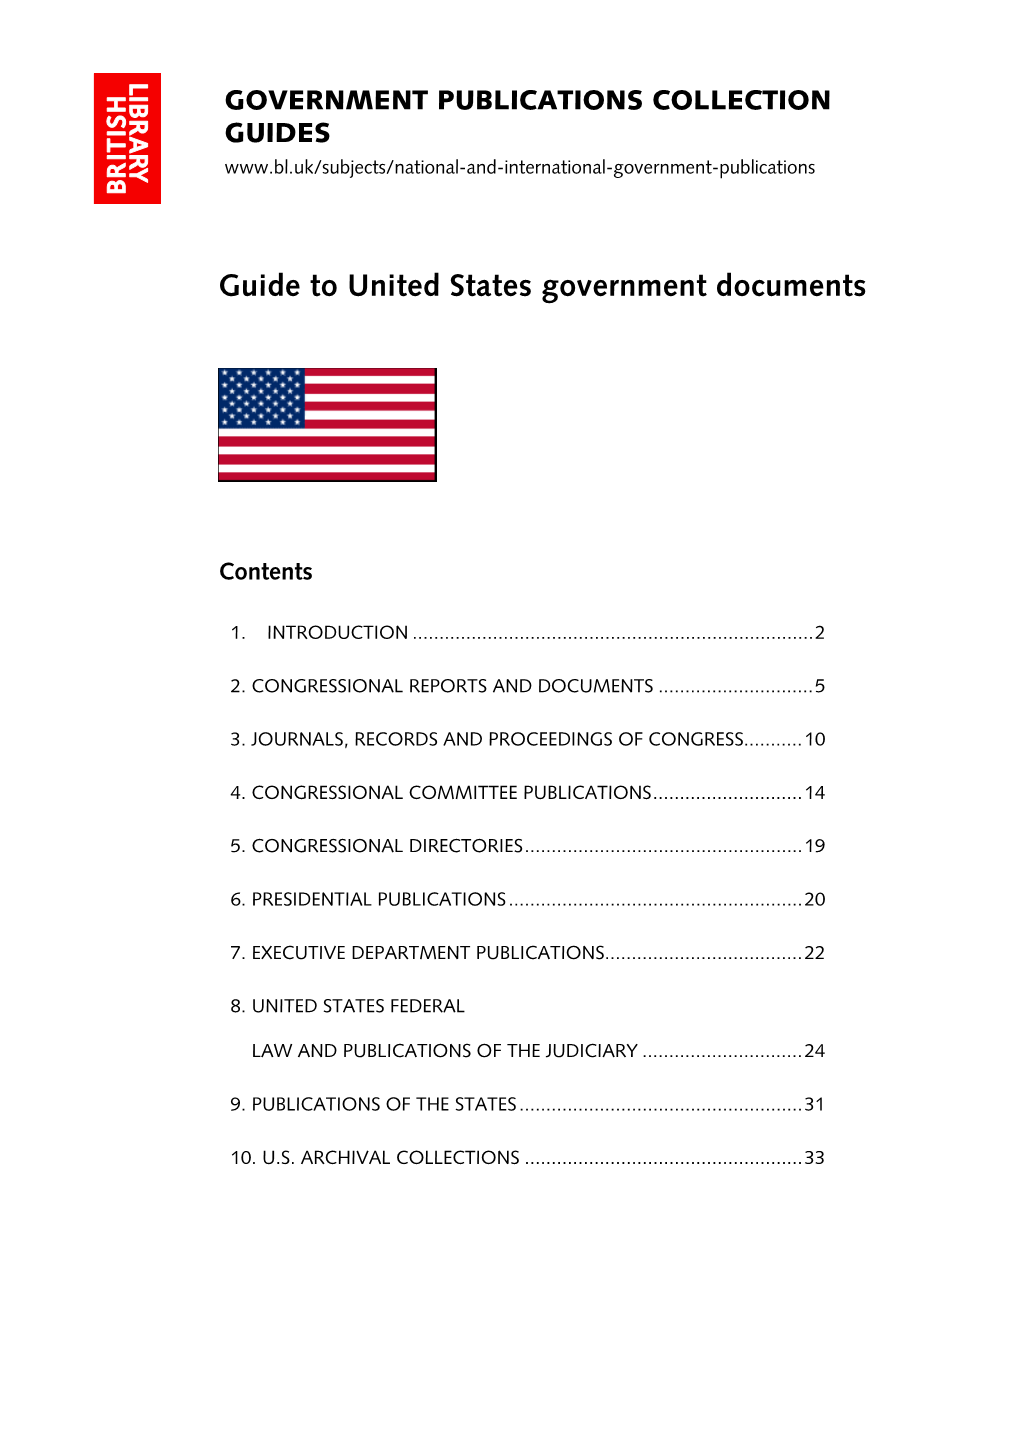 Guide to United States Government Documents